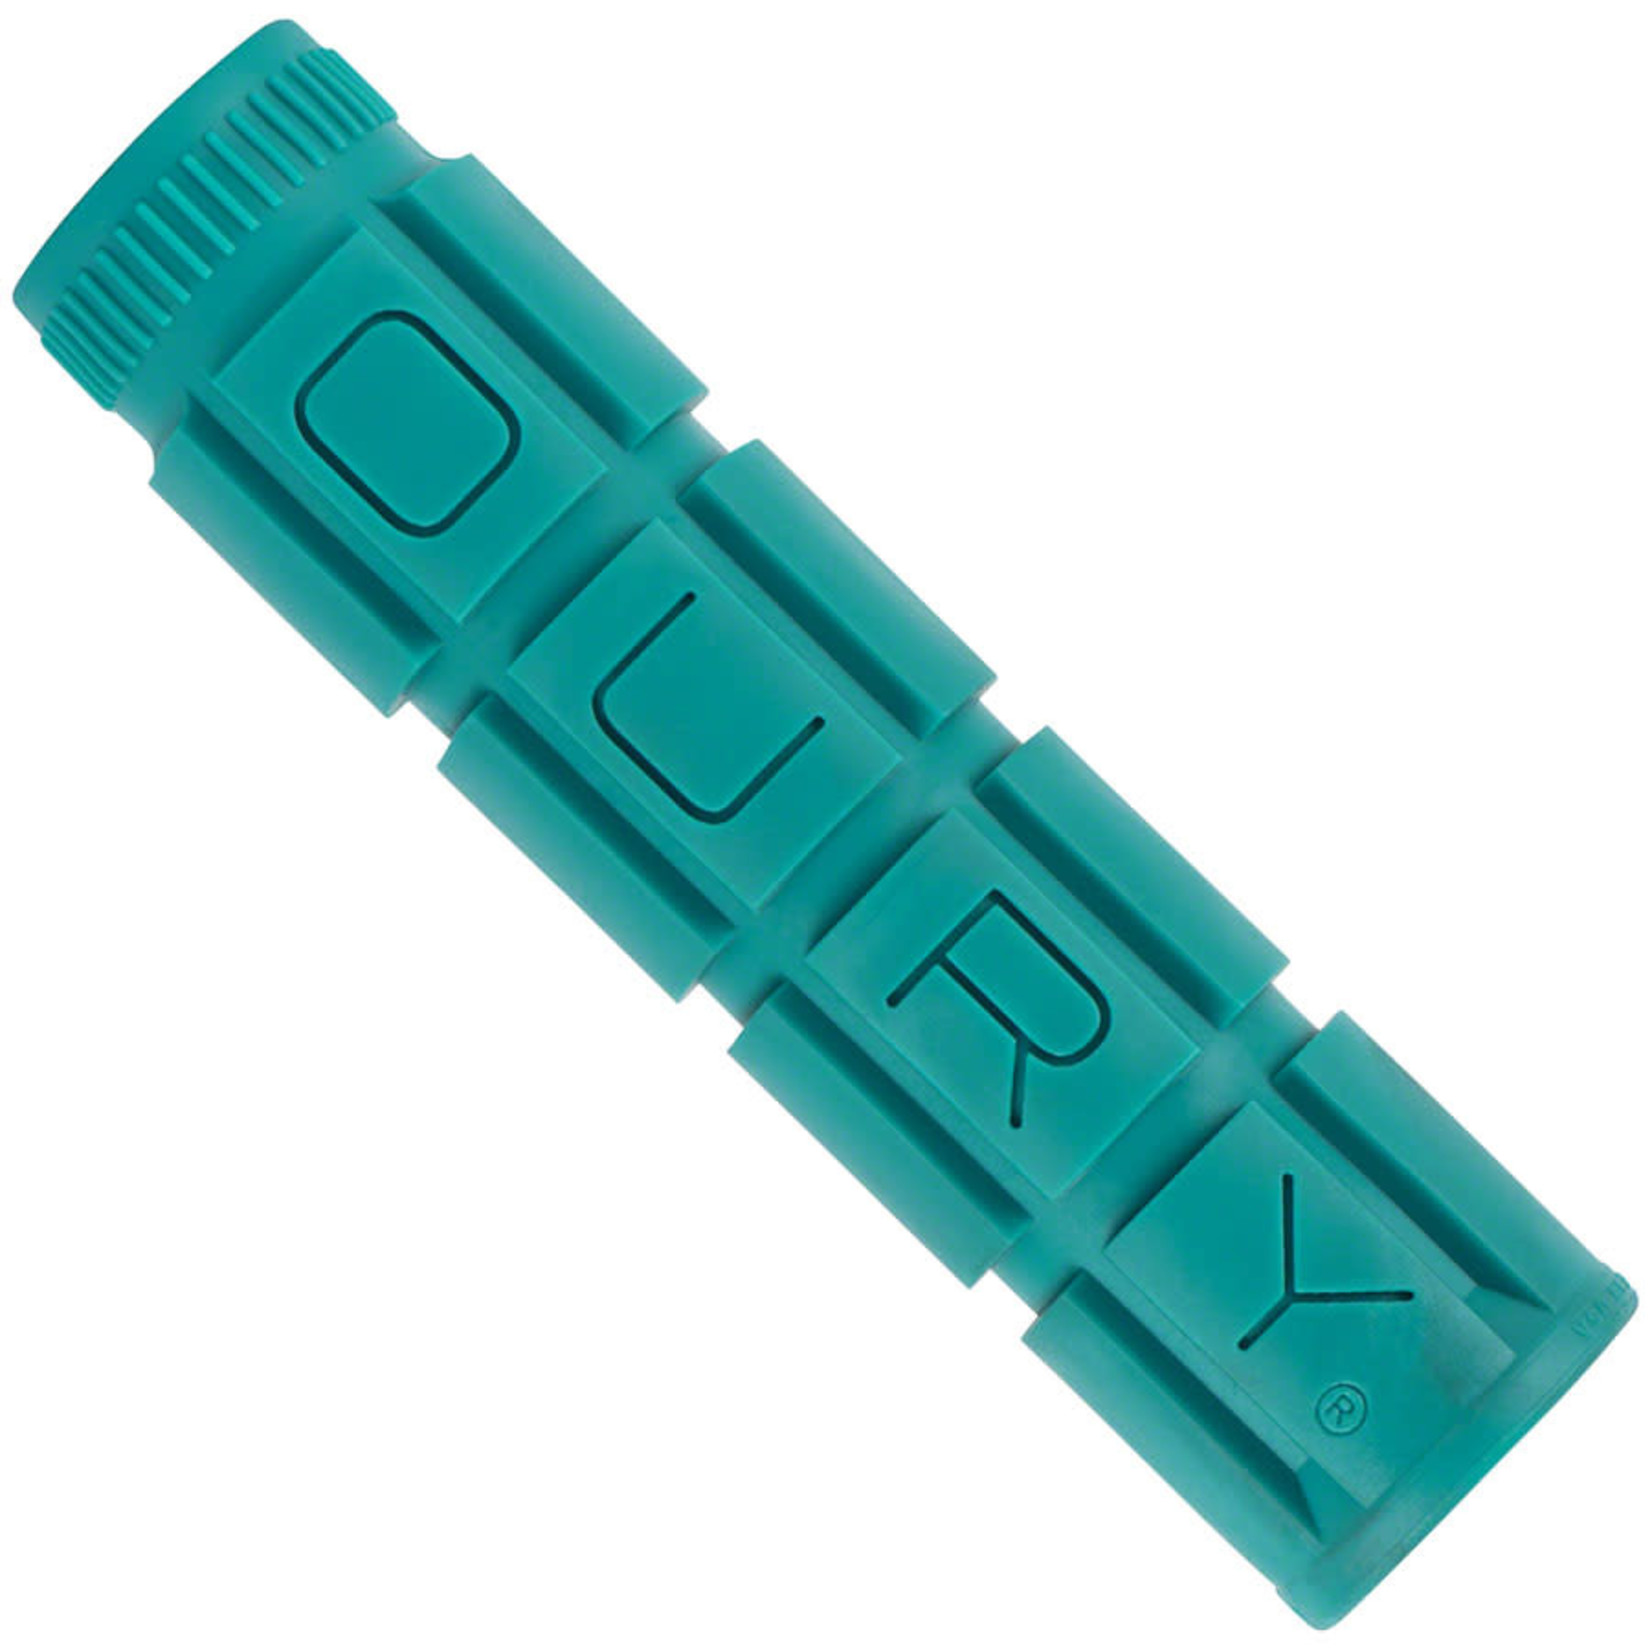 Oury Oury Single Compound V2 Grips - Teal